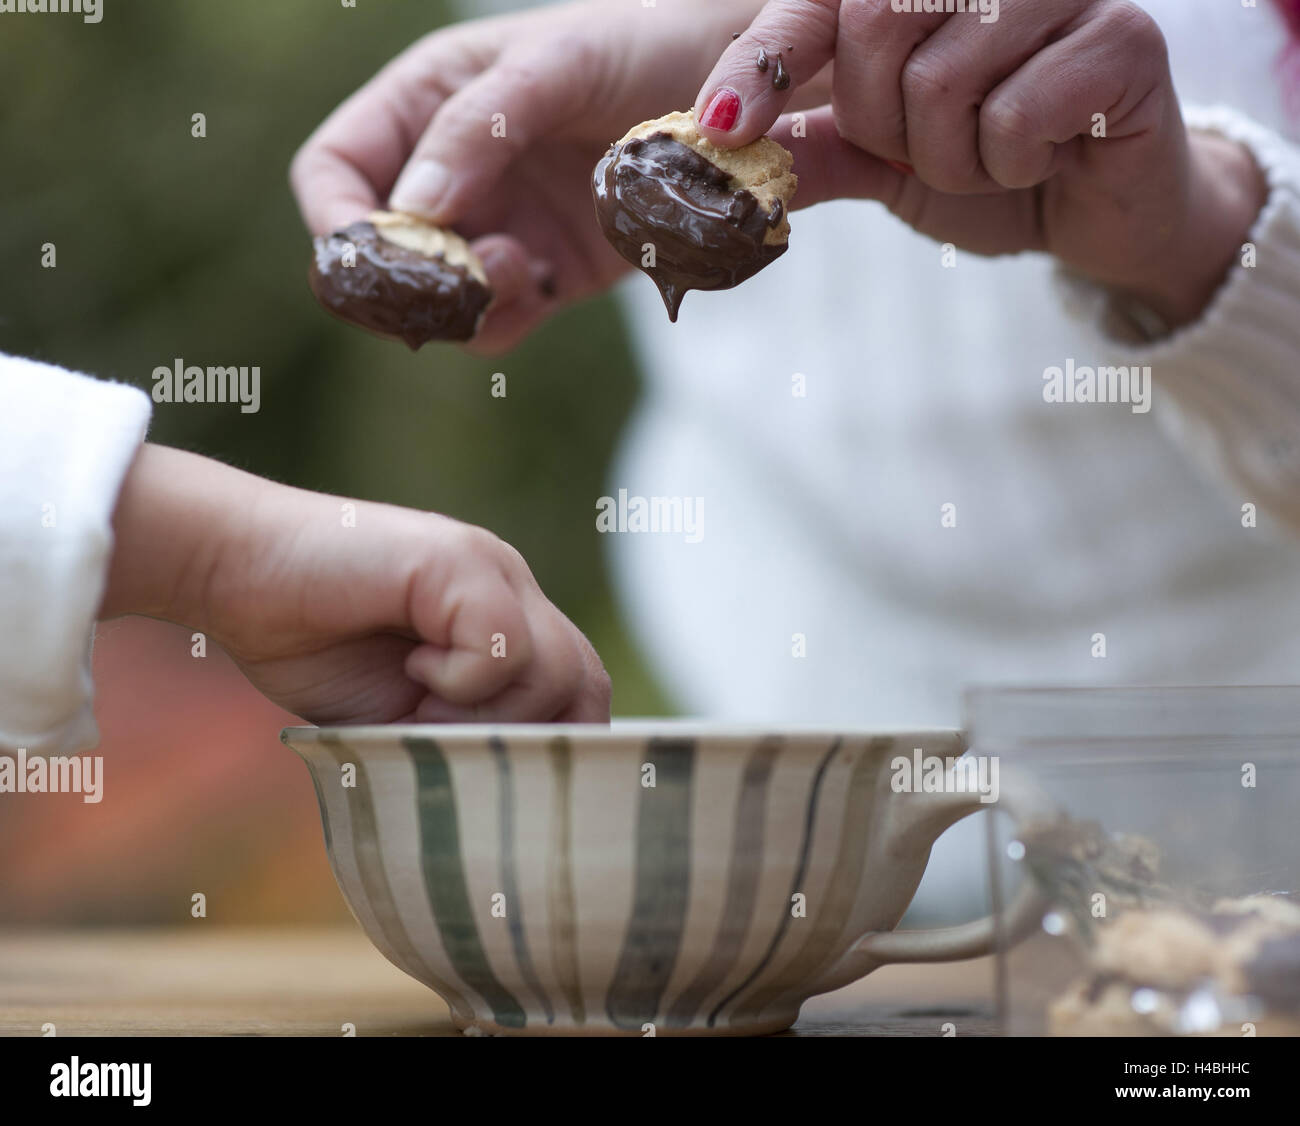 Women, child, baking cookies, dipping in chocolate, close-up, detail, Stock Photo